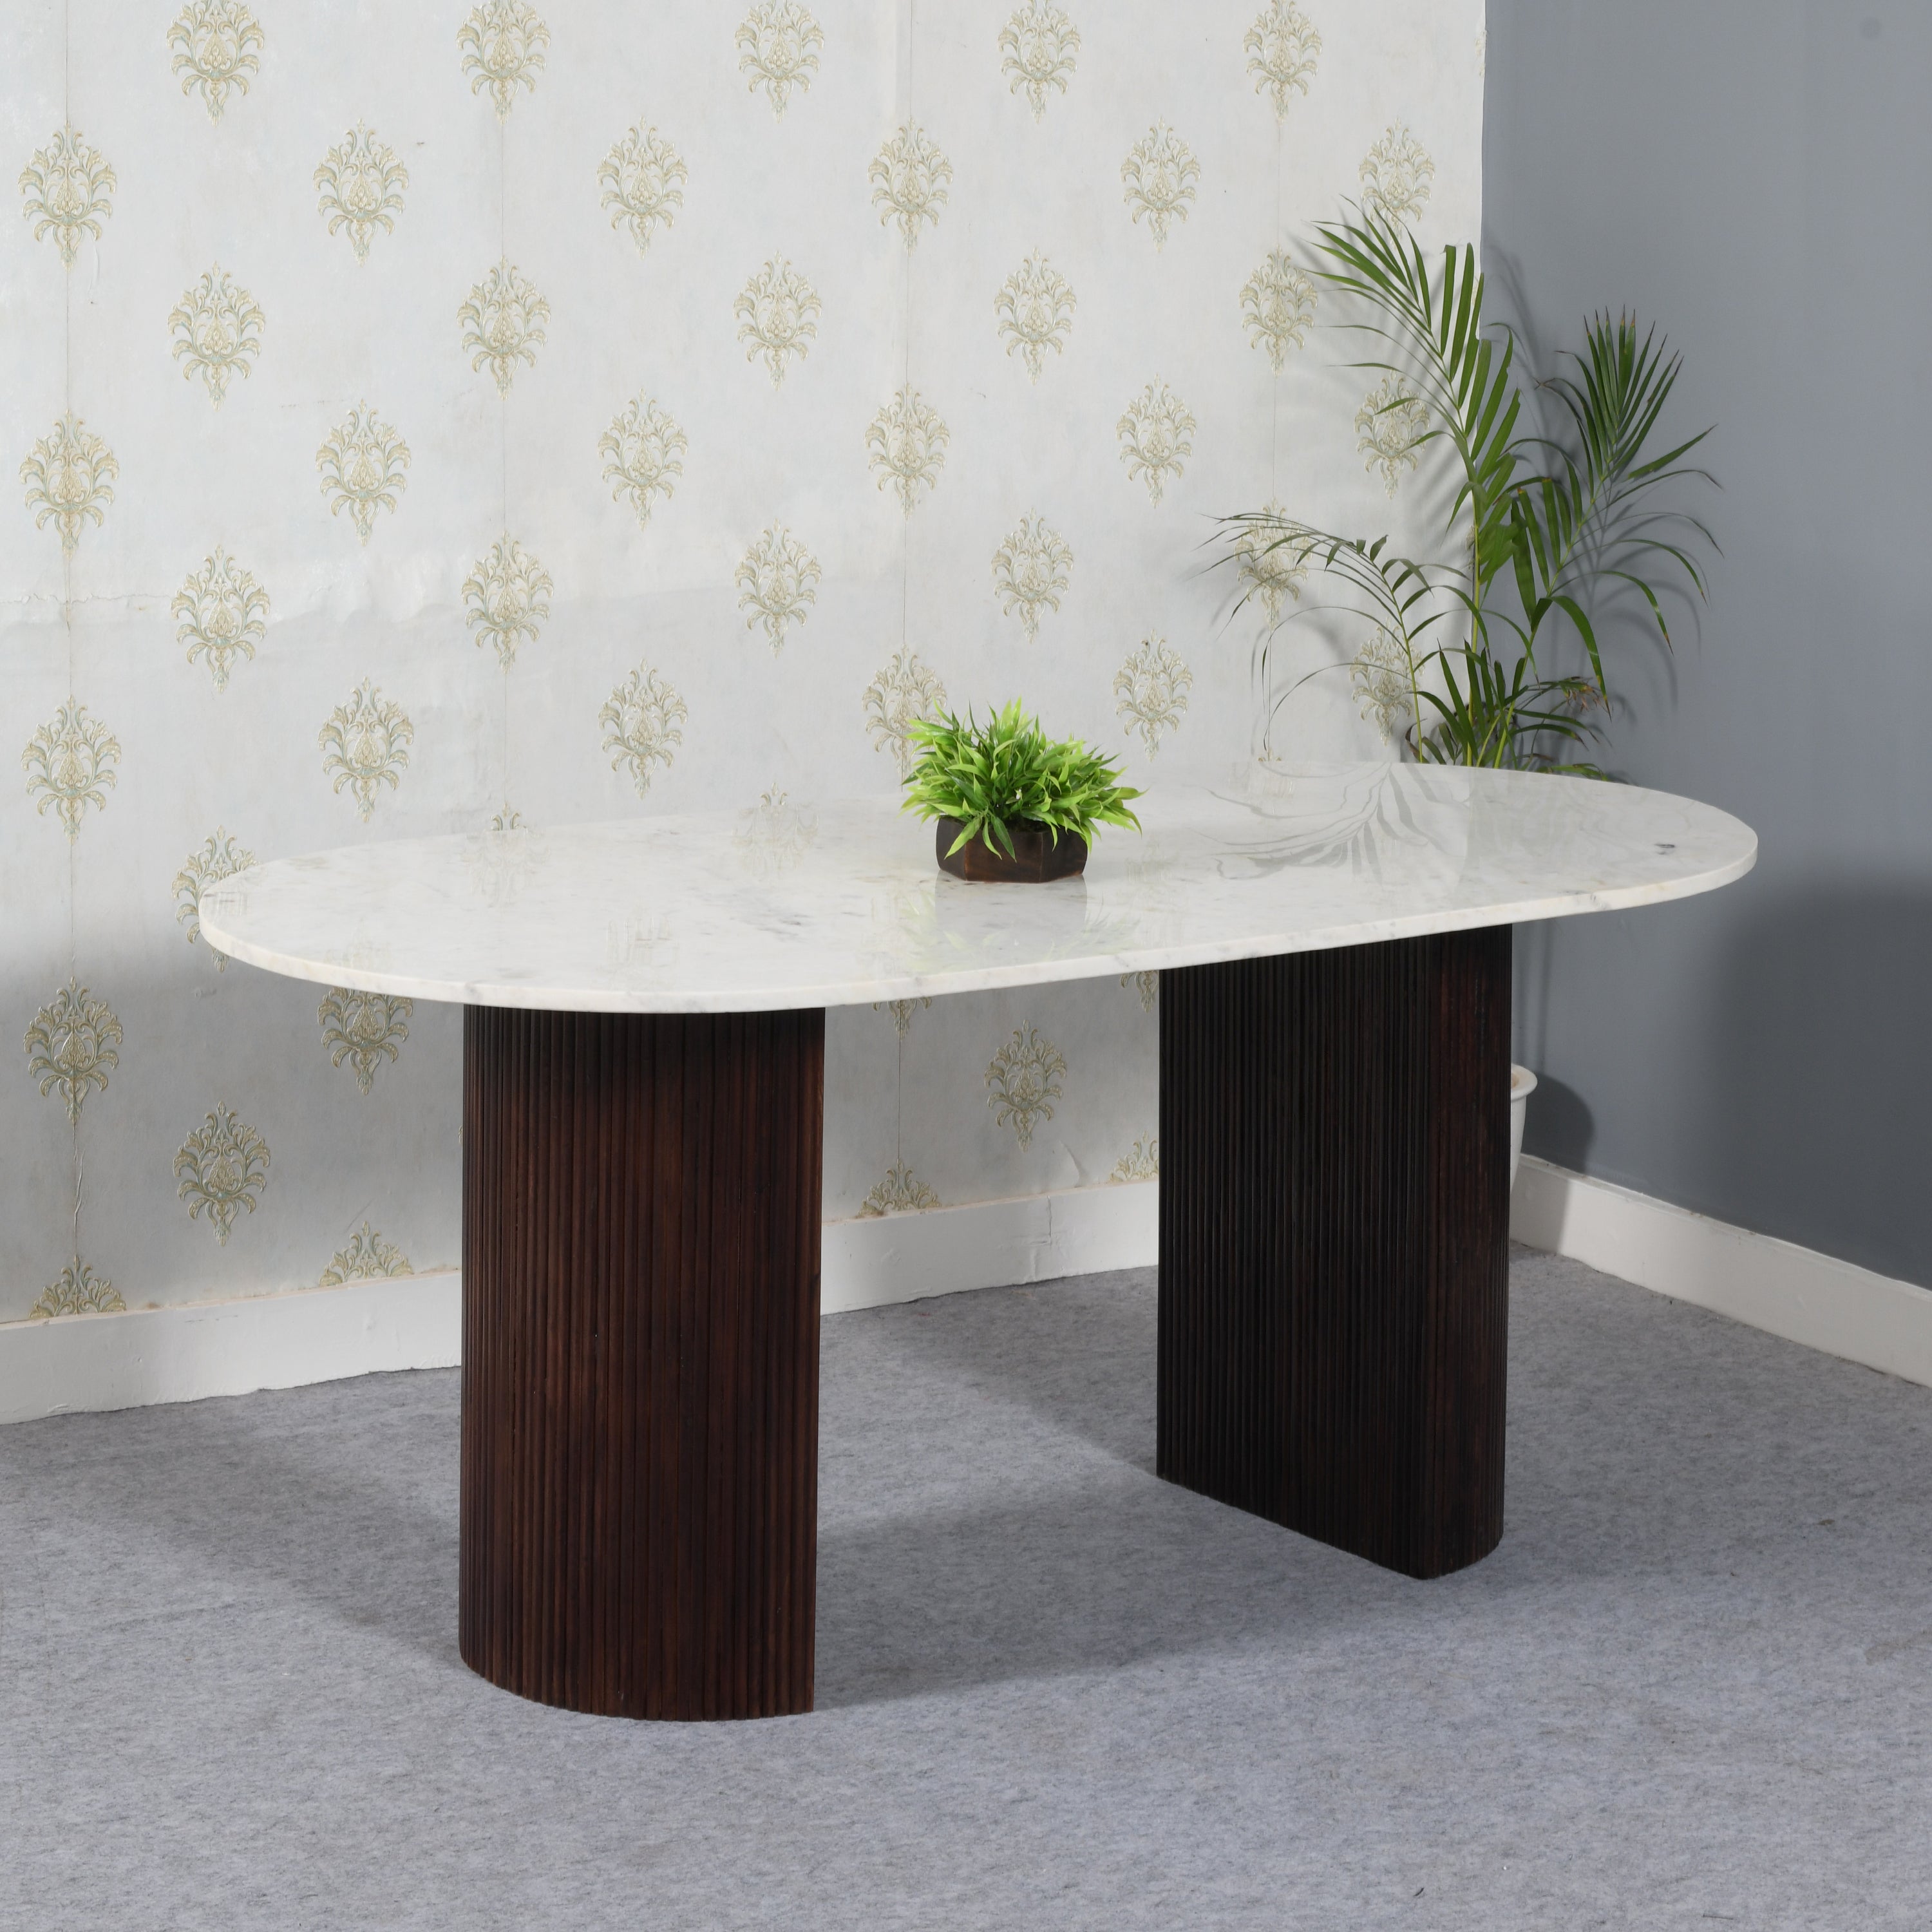 Luxor Mango Wood Dining Table 170Cm With Marble Top - Verty Furniture